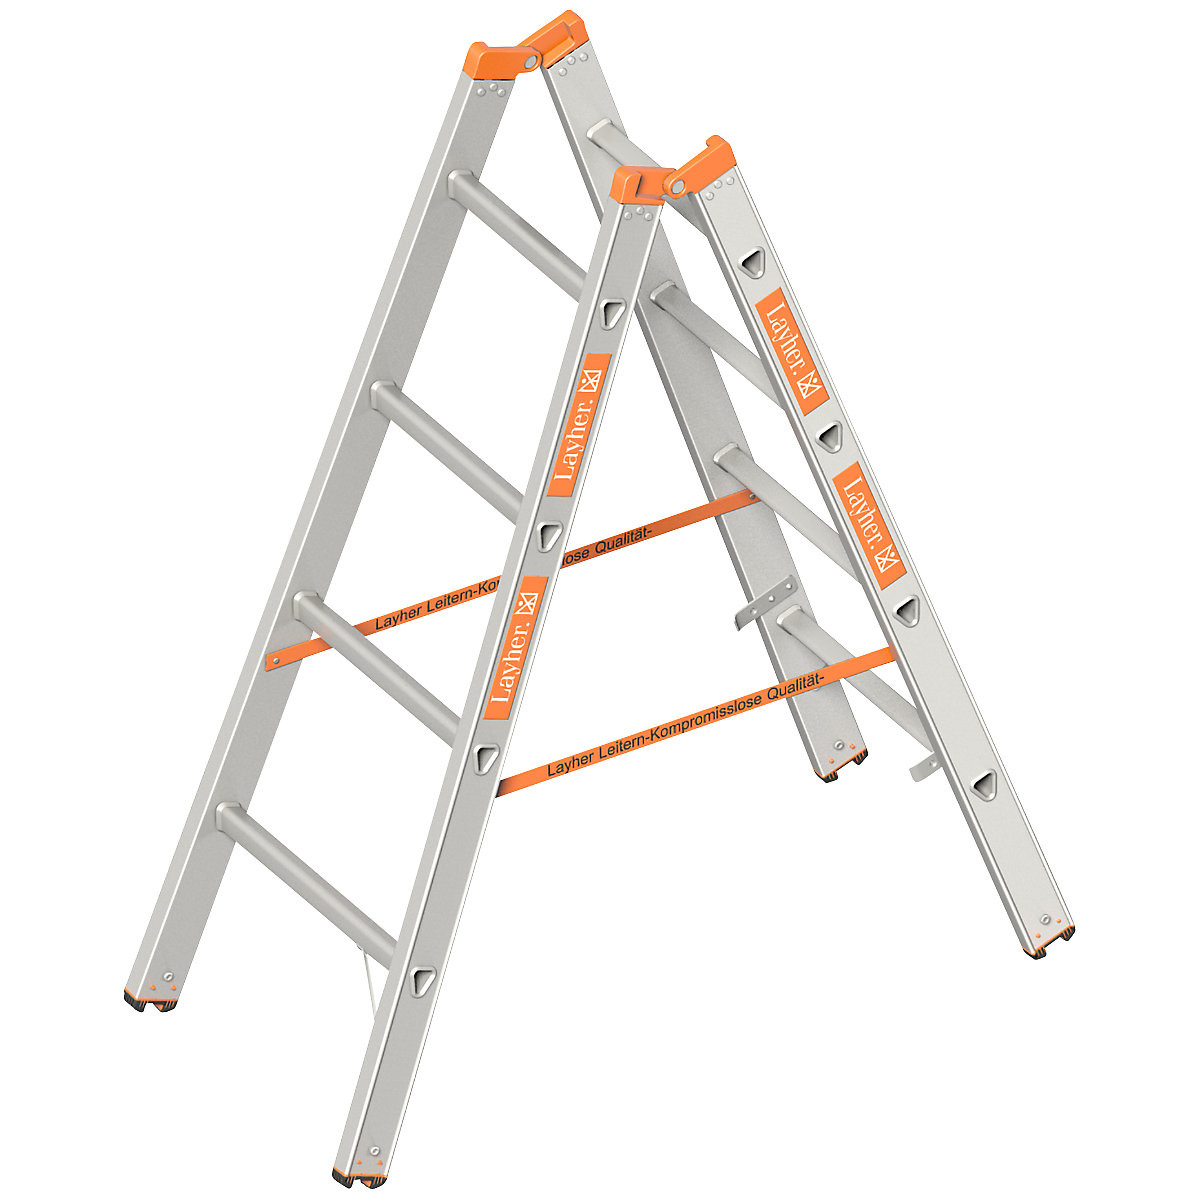 Double sided rung ladder - Layher